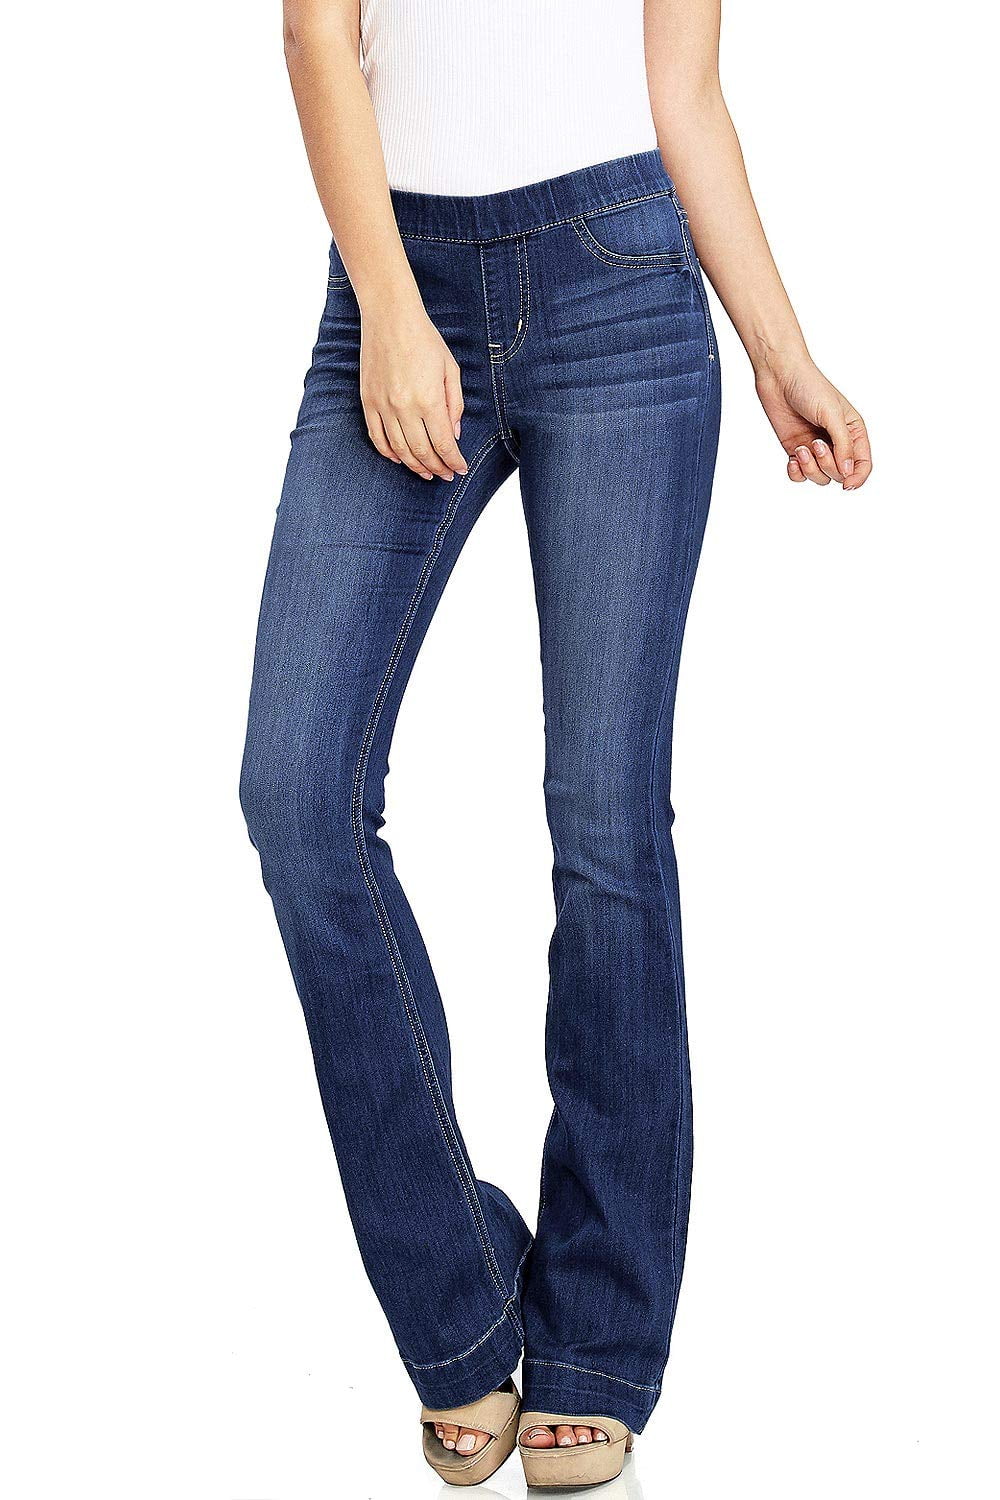 Cello Womens Juniors Mid Waist Skinny Fit Bootcut Pants